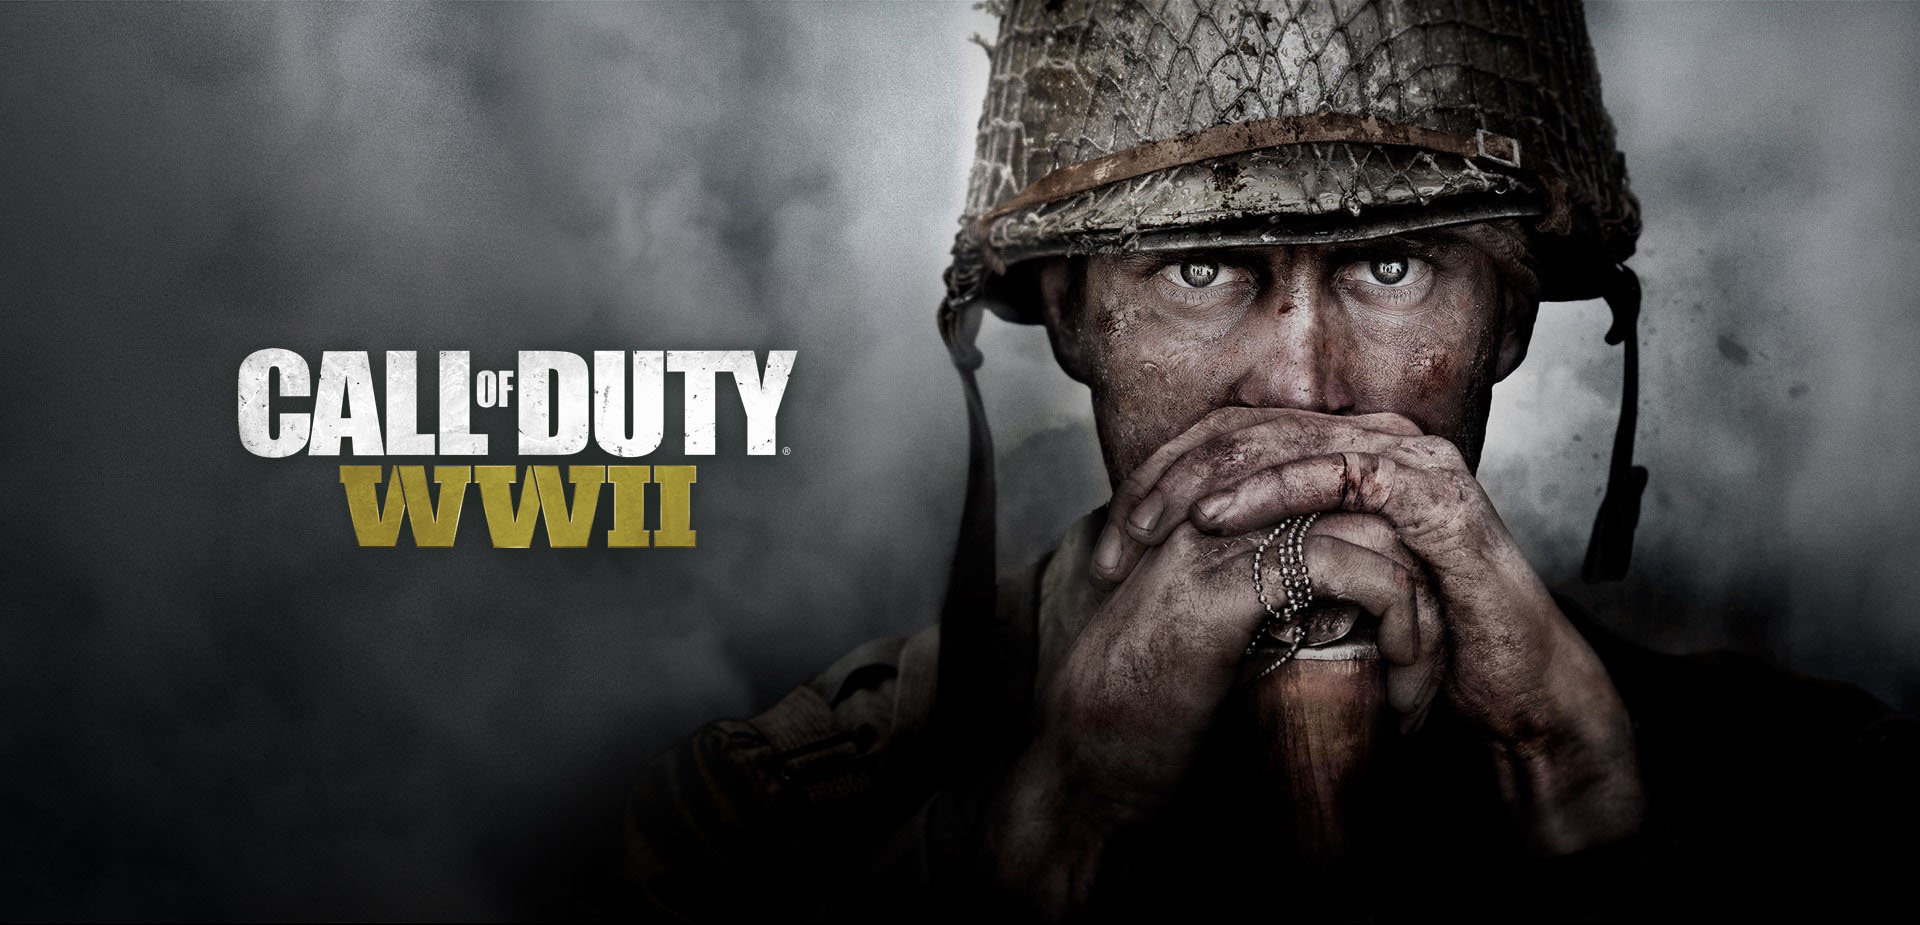 Call of Duty: WWII Officially Announced, Full Reveal Coming April 26